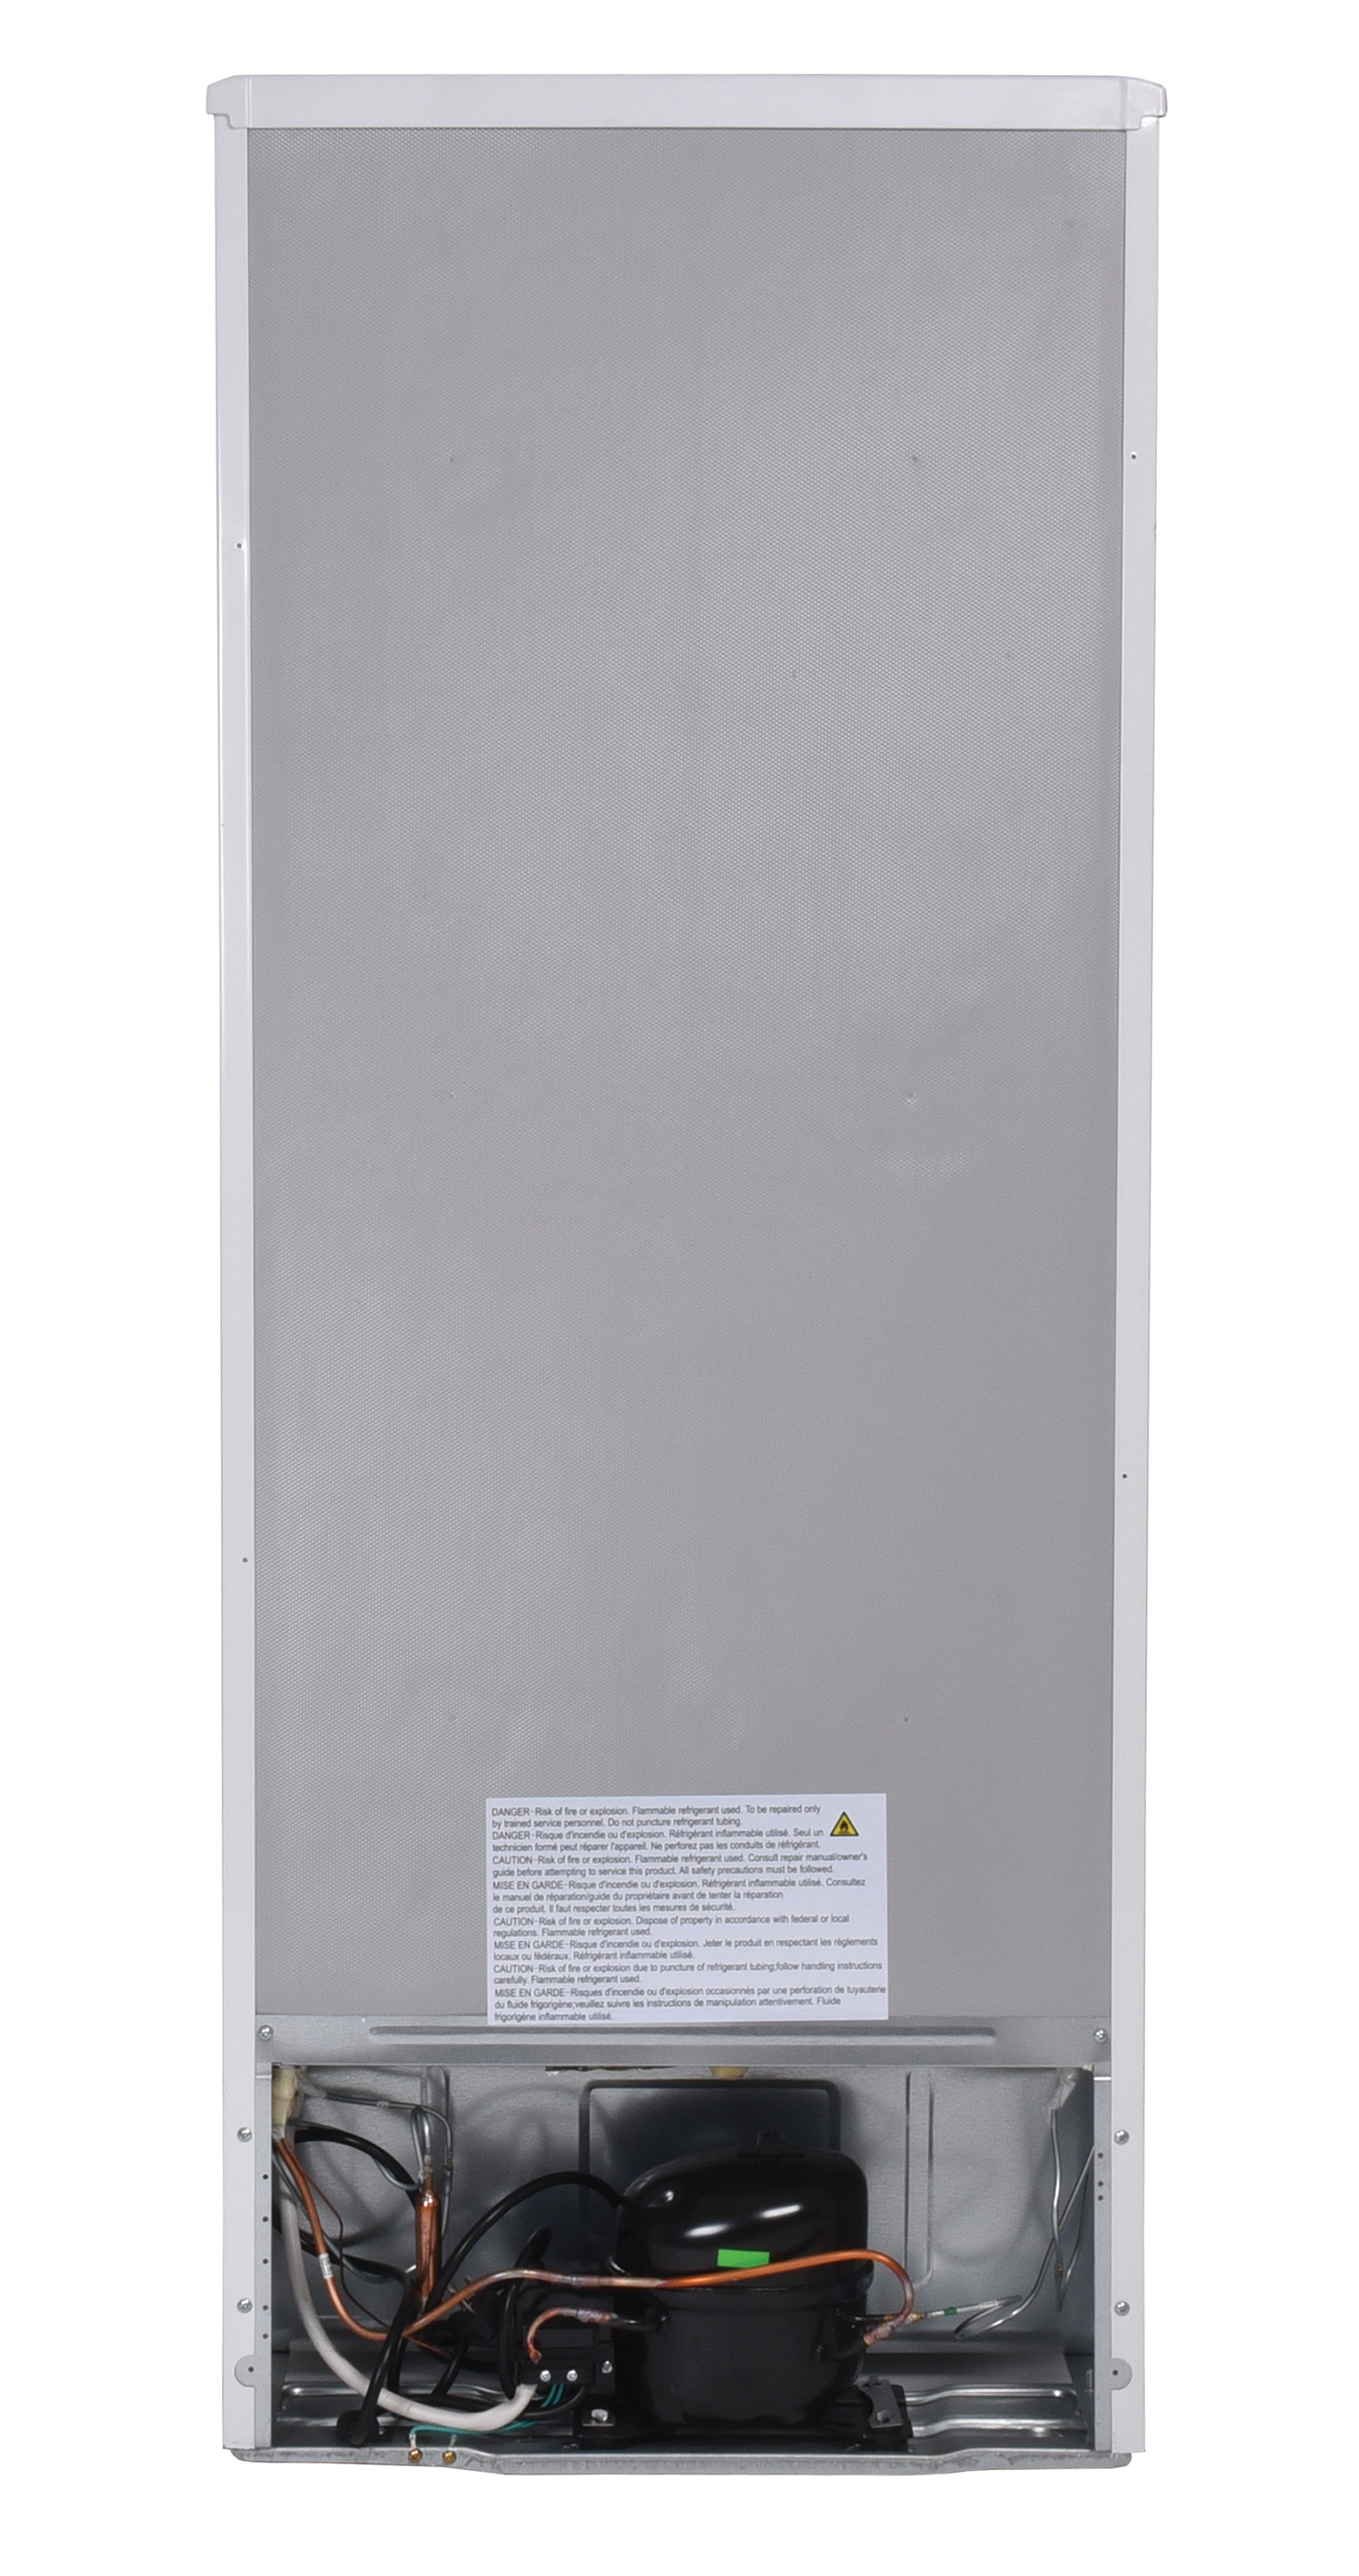 Danby 7.3 Cubic Feet 2 Door Apartment Sized Refrigerator, White - image 4 of 10